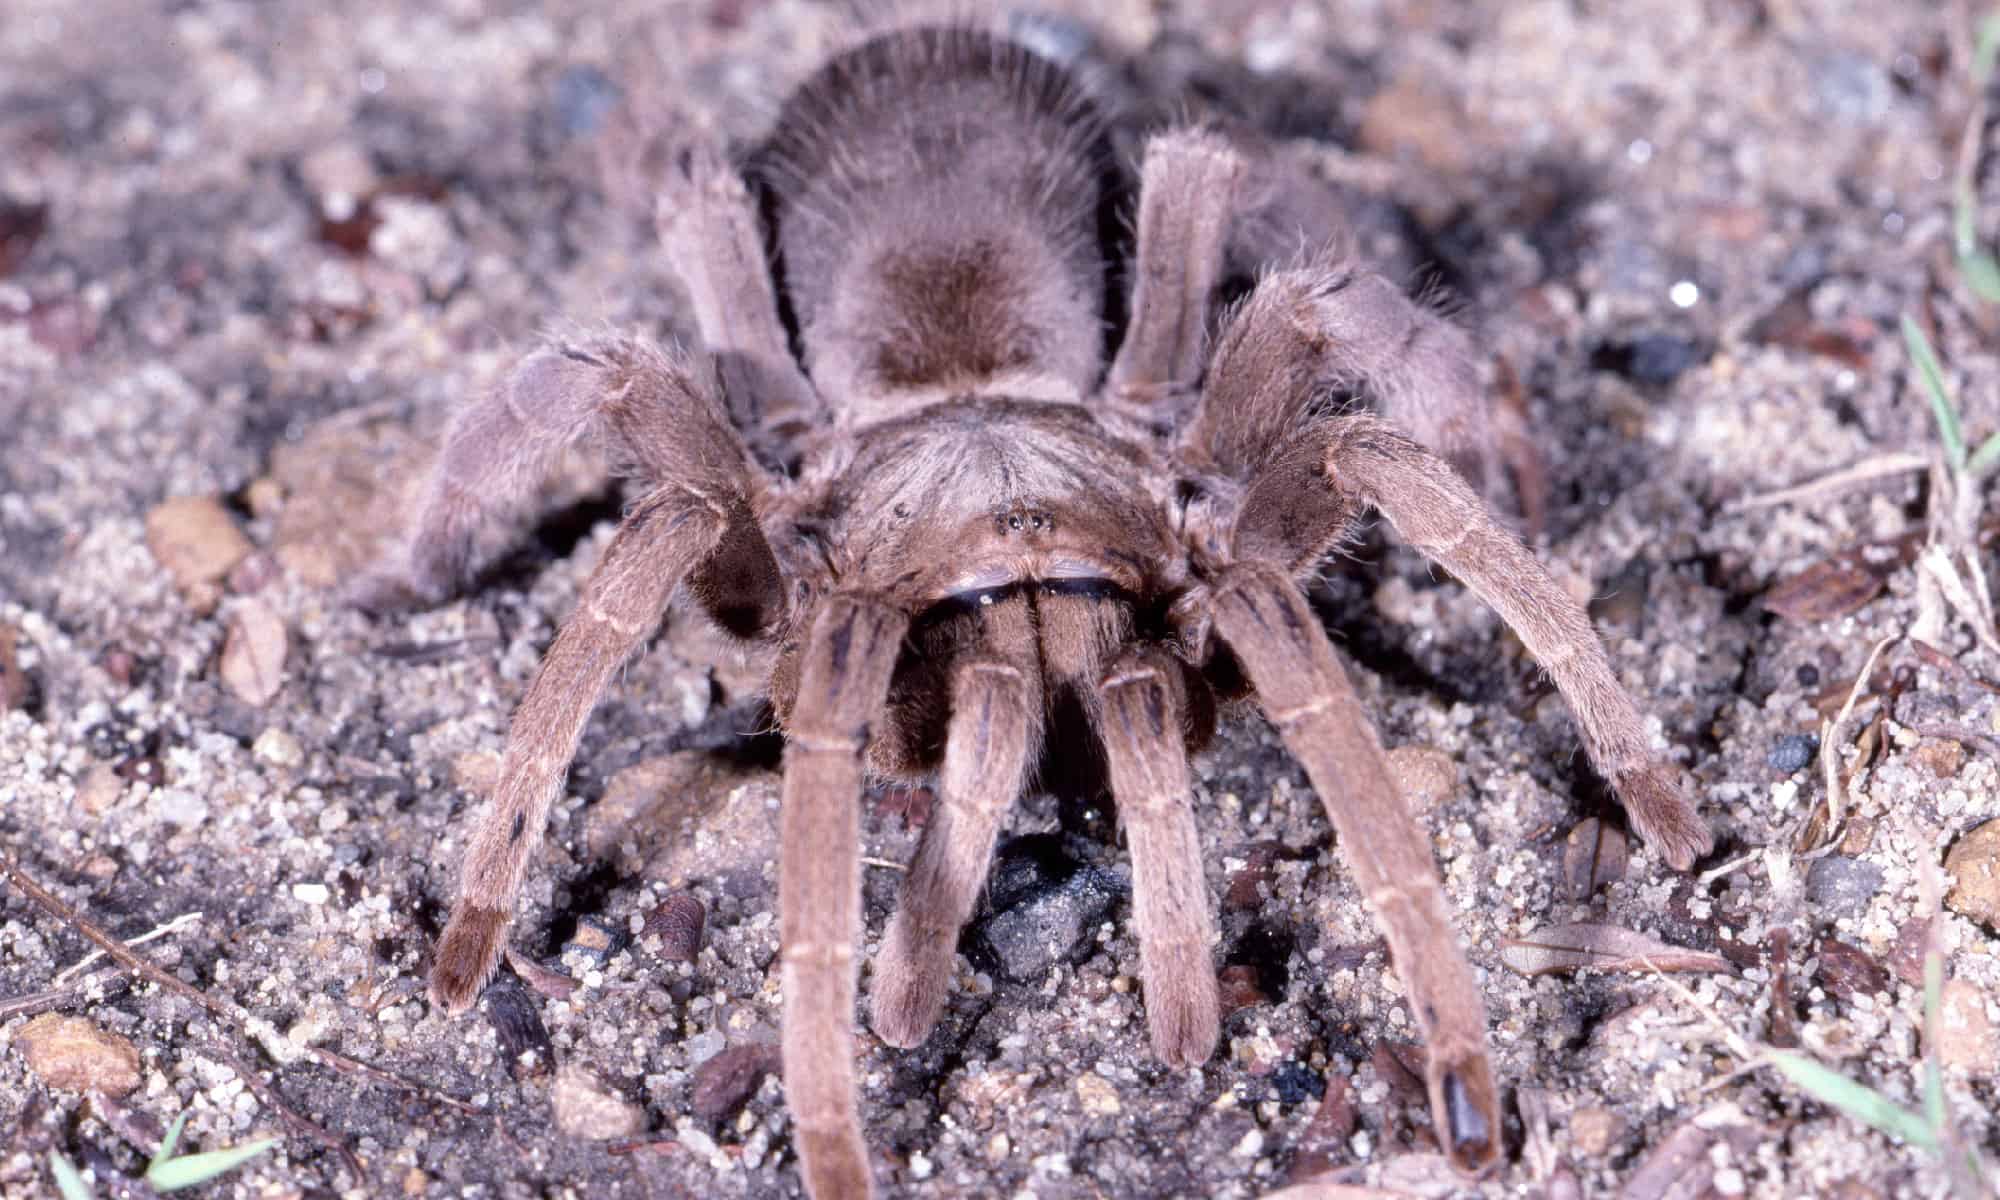 <p>The Queensland whistling tarantula is native throughout Australia. It has an enormous 8.7-inch leg span. They are sometimes called a "barking spider" or "bird-eating tarantula." The spider creates sound by rubbing rows of modified spines on the basal segments of their pedipalps against opposing spines on their jaw bases. They make this noise when trying to dissuade a predator.</p>